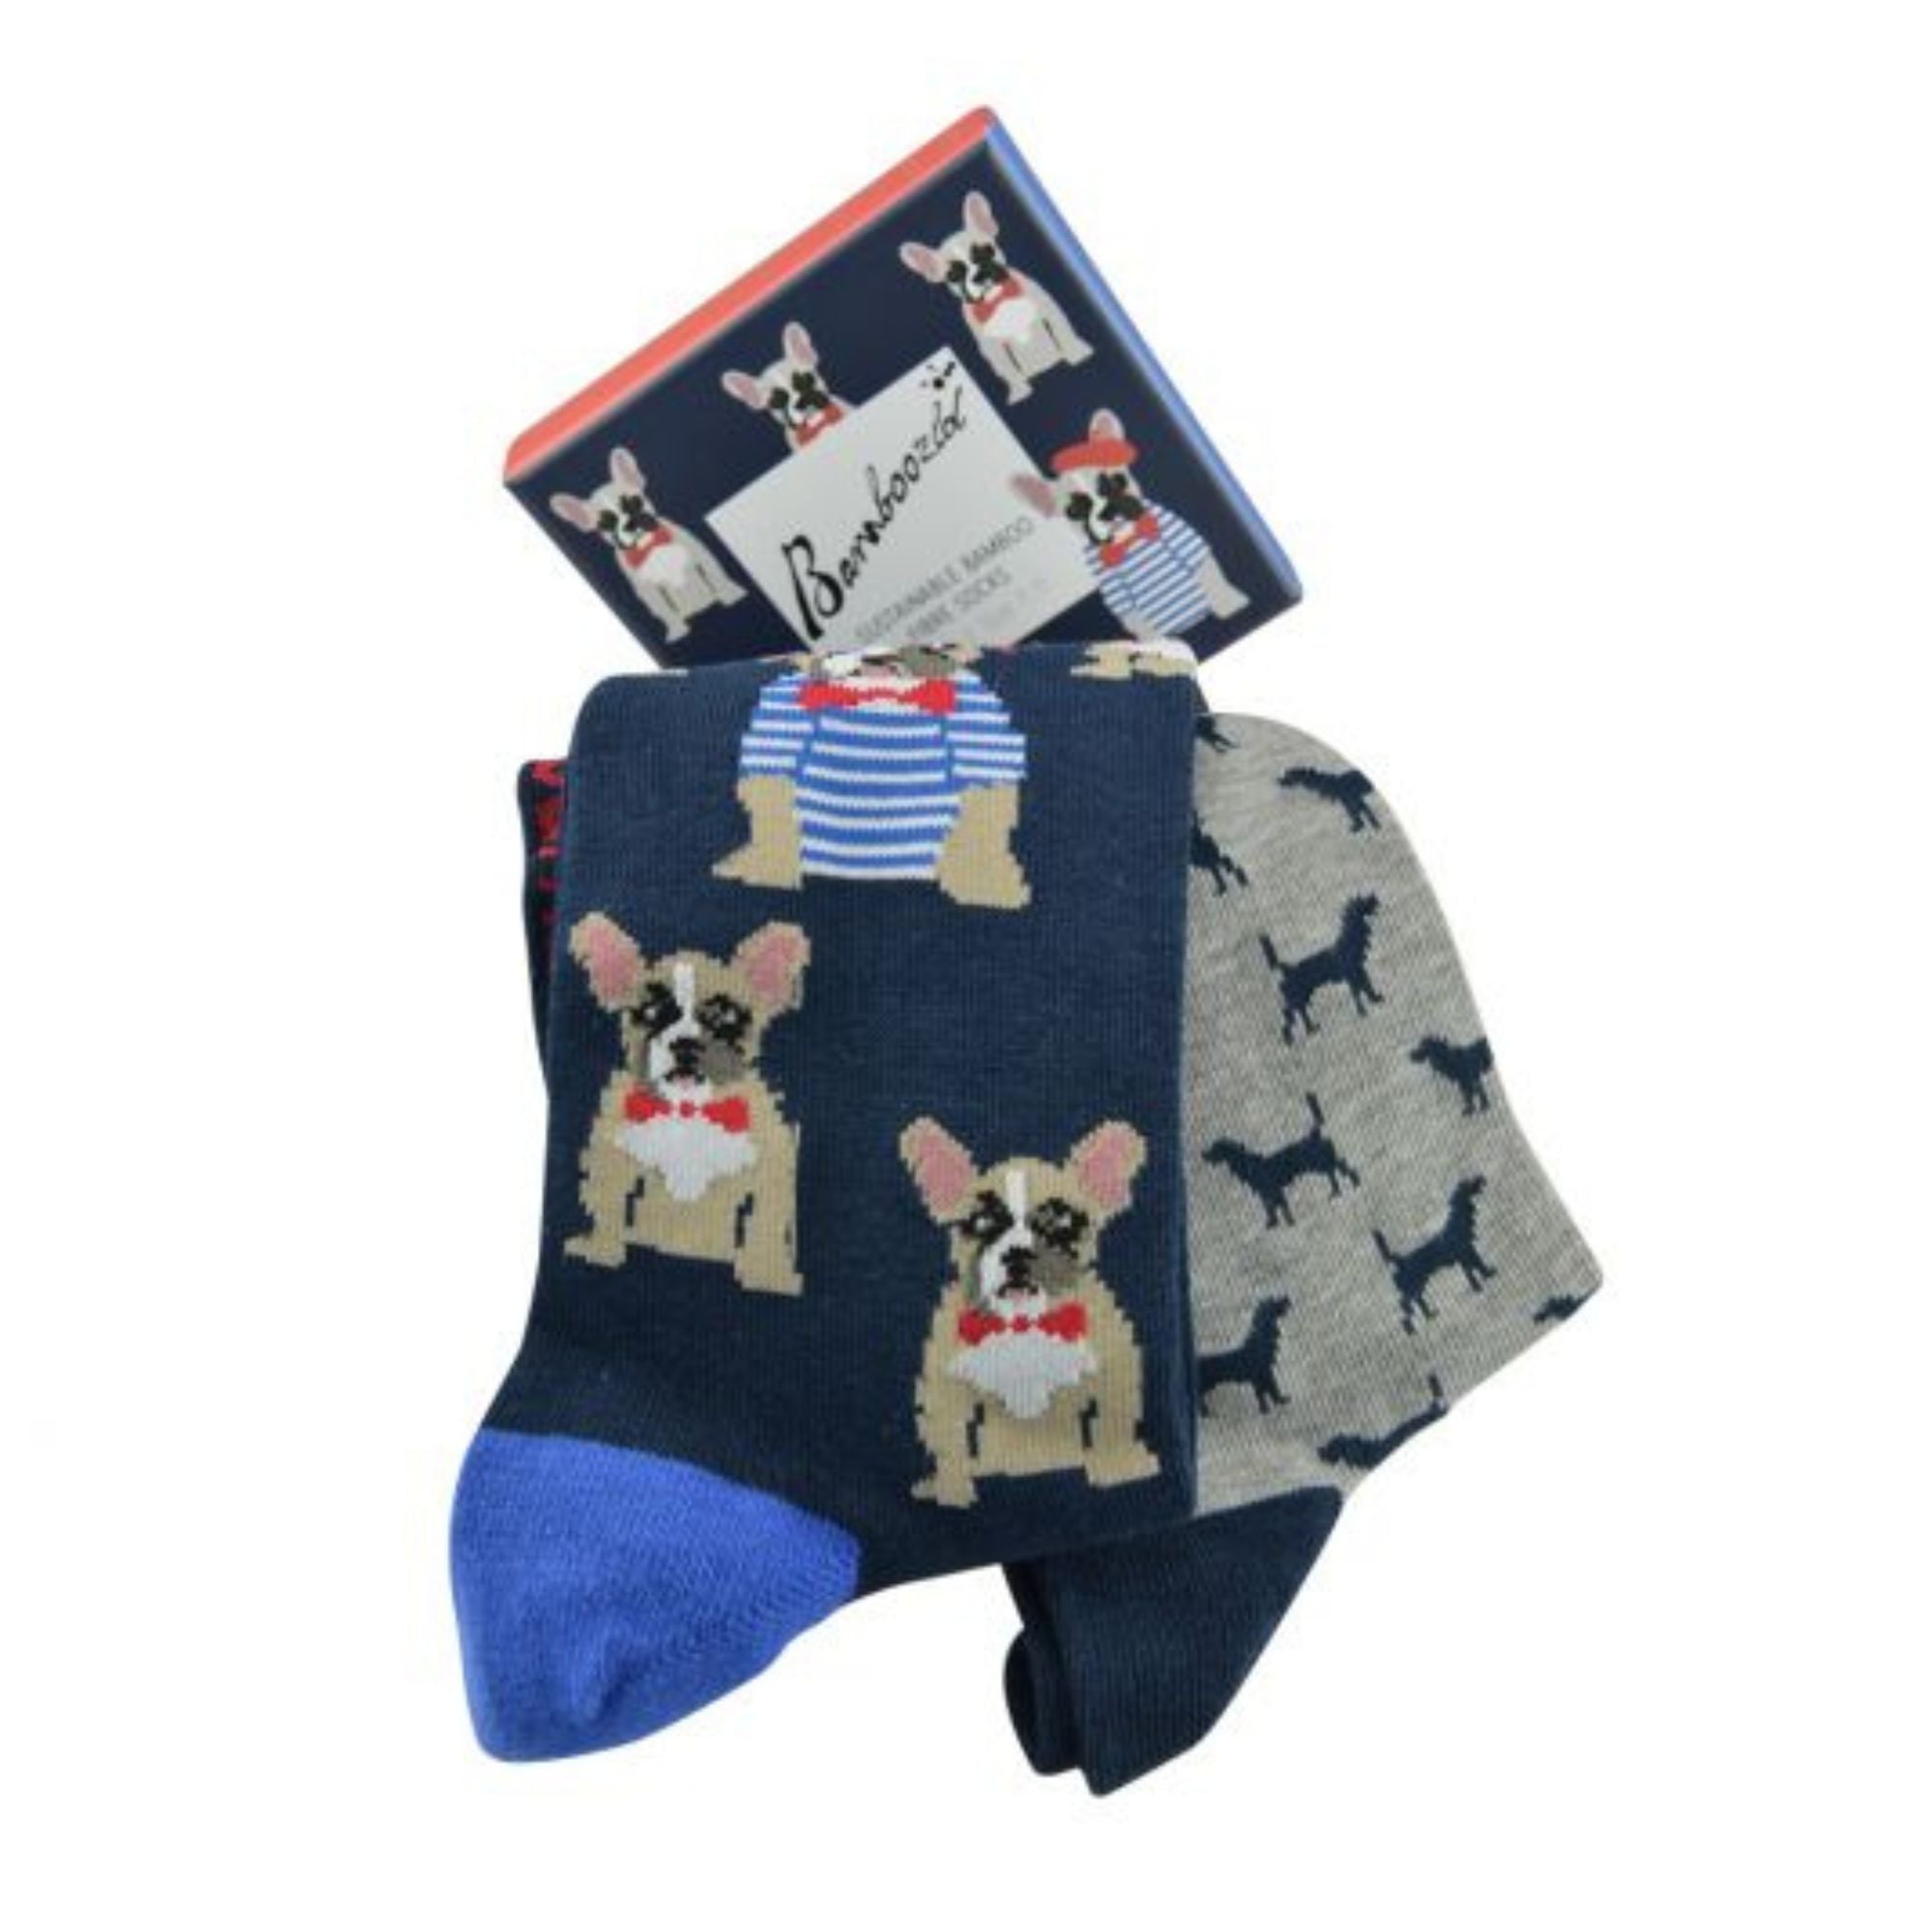 Frenchy Dogs 2 pair Socks Gift Box